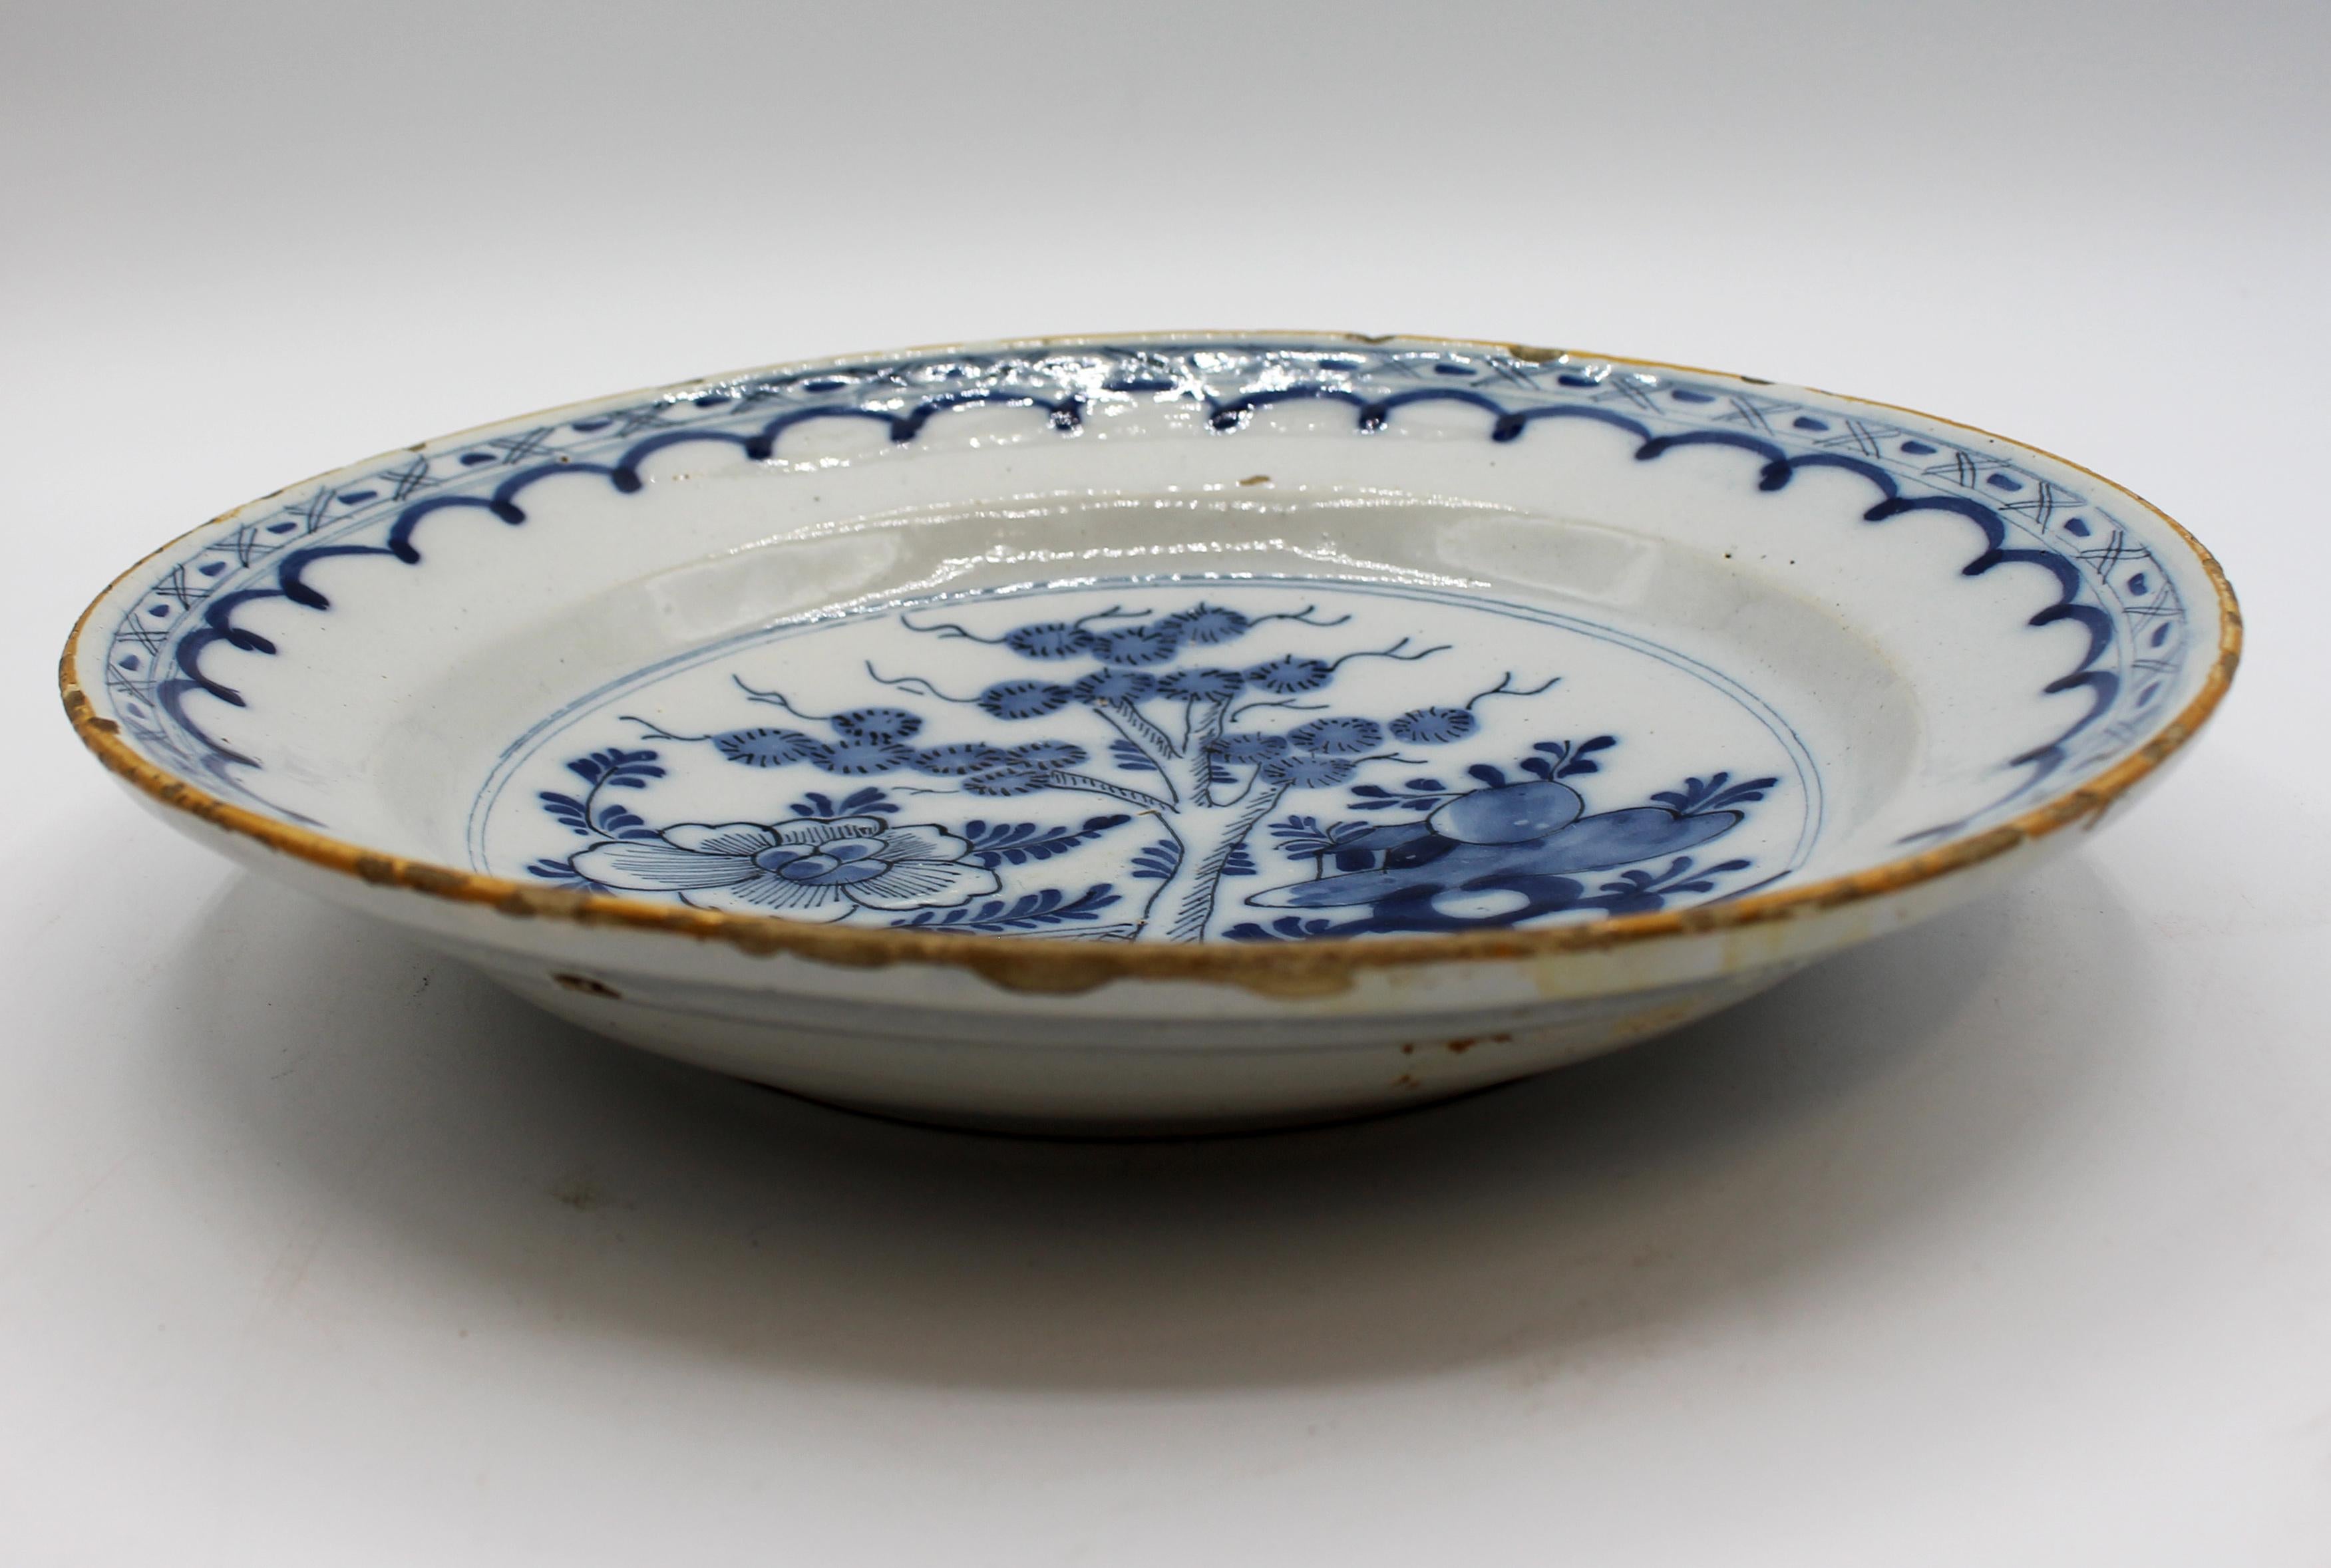 Late 18th century Delft blue & white deep chop plate. Central Asian influence garden scene with simple shaped repetitive border and yellow rim. Frits commensurate with material, age & use. 10.25